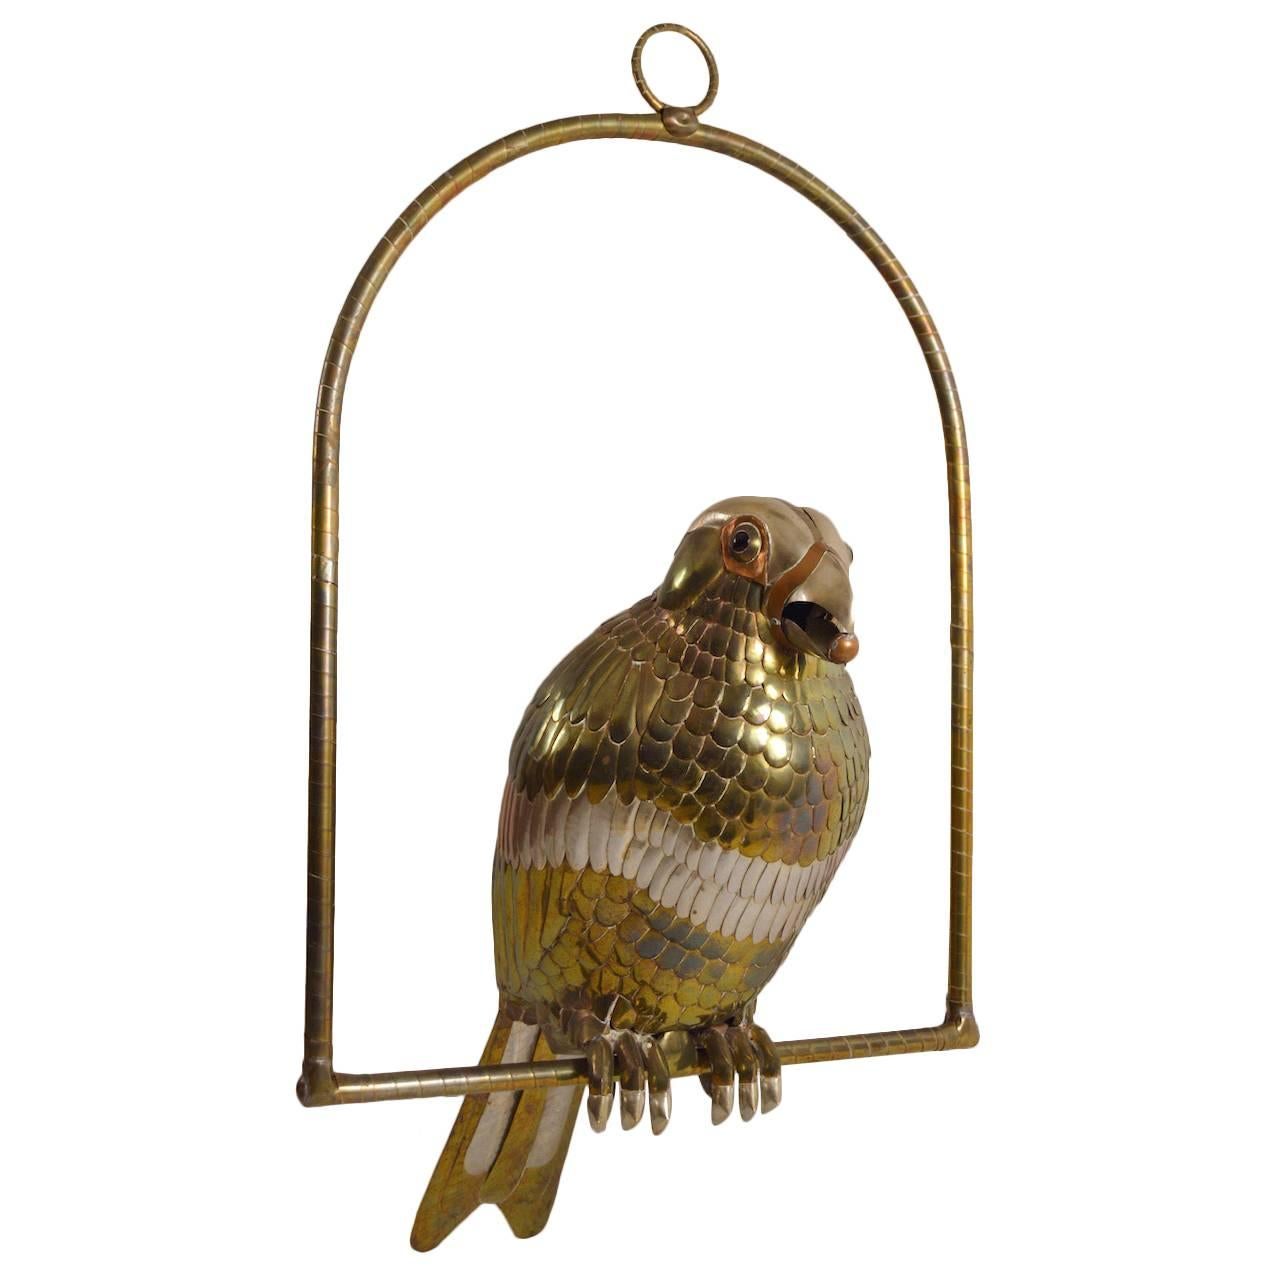 Sergio Bustamante Copper Parrot on Swing